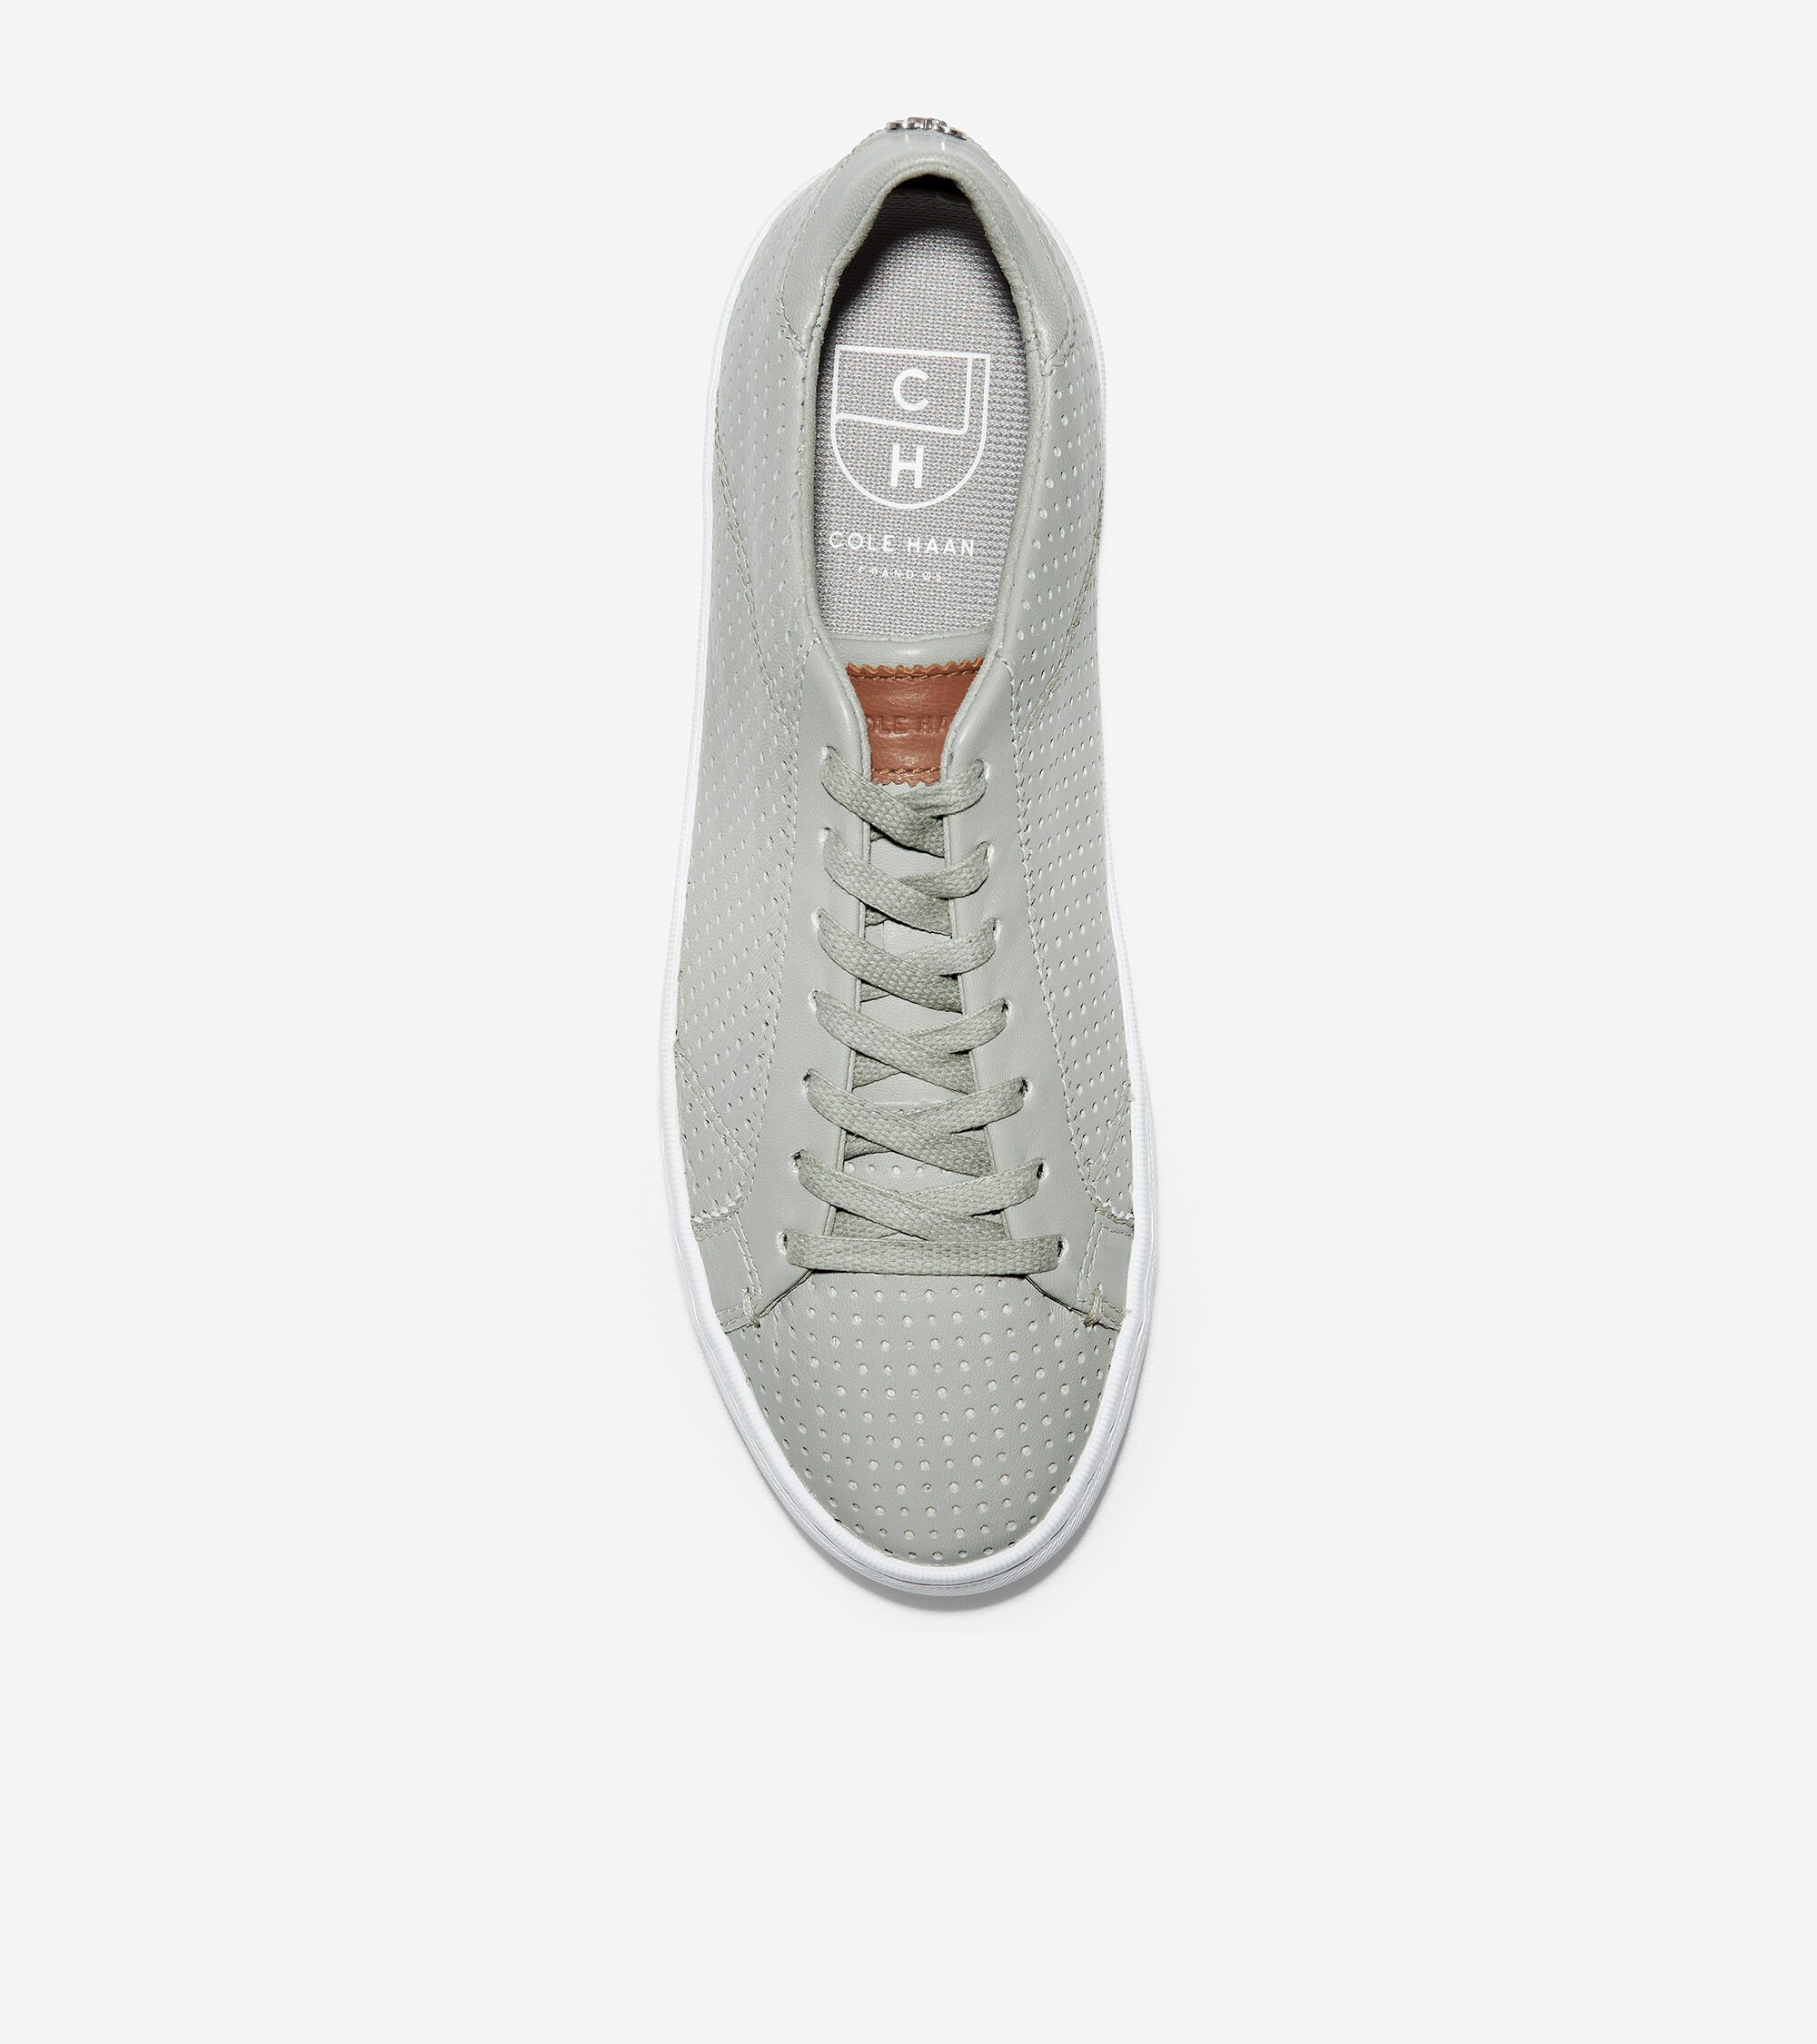 cole haan margo lace up sneakers